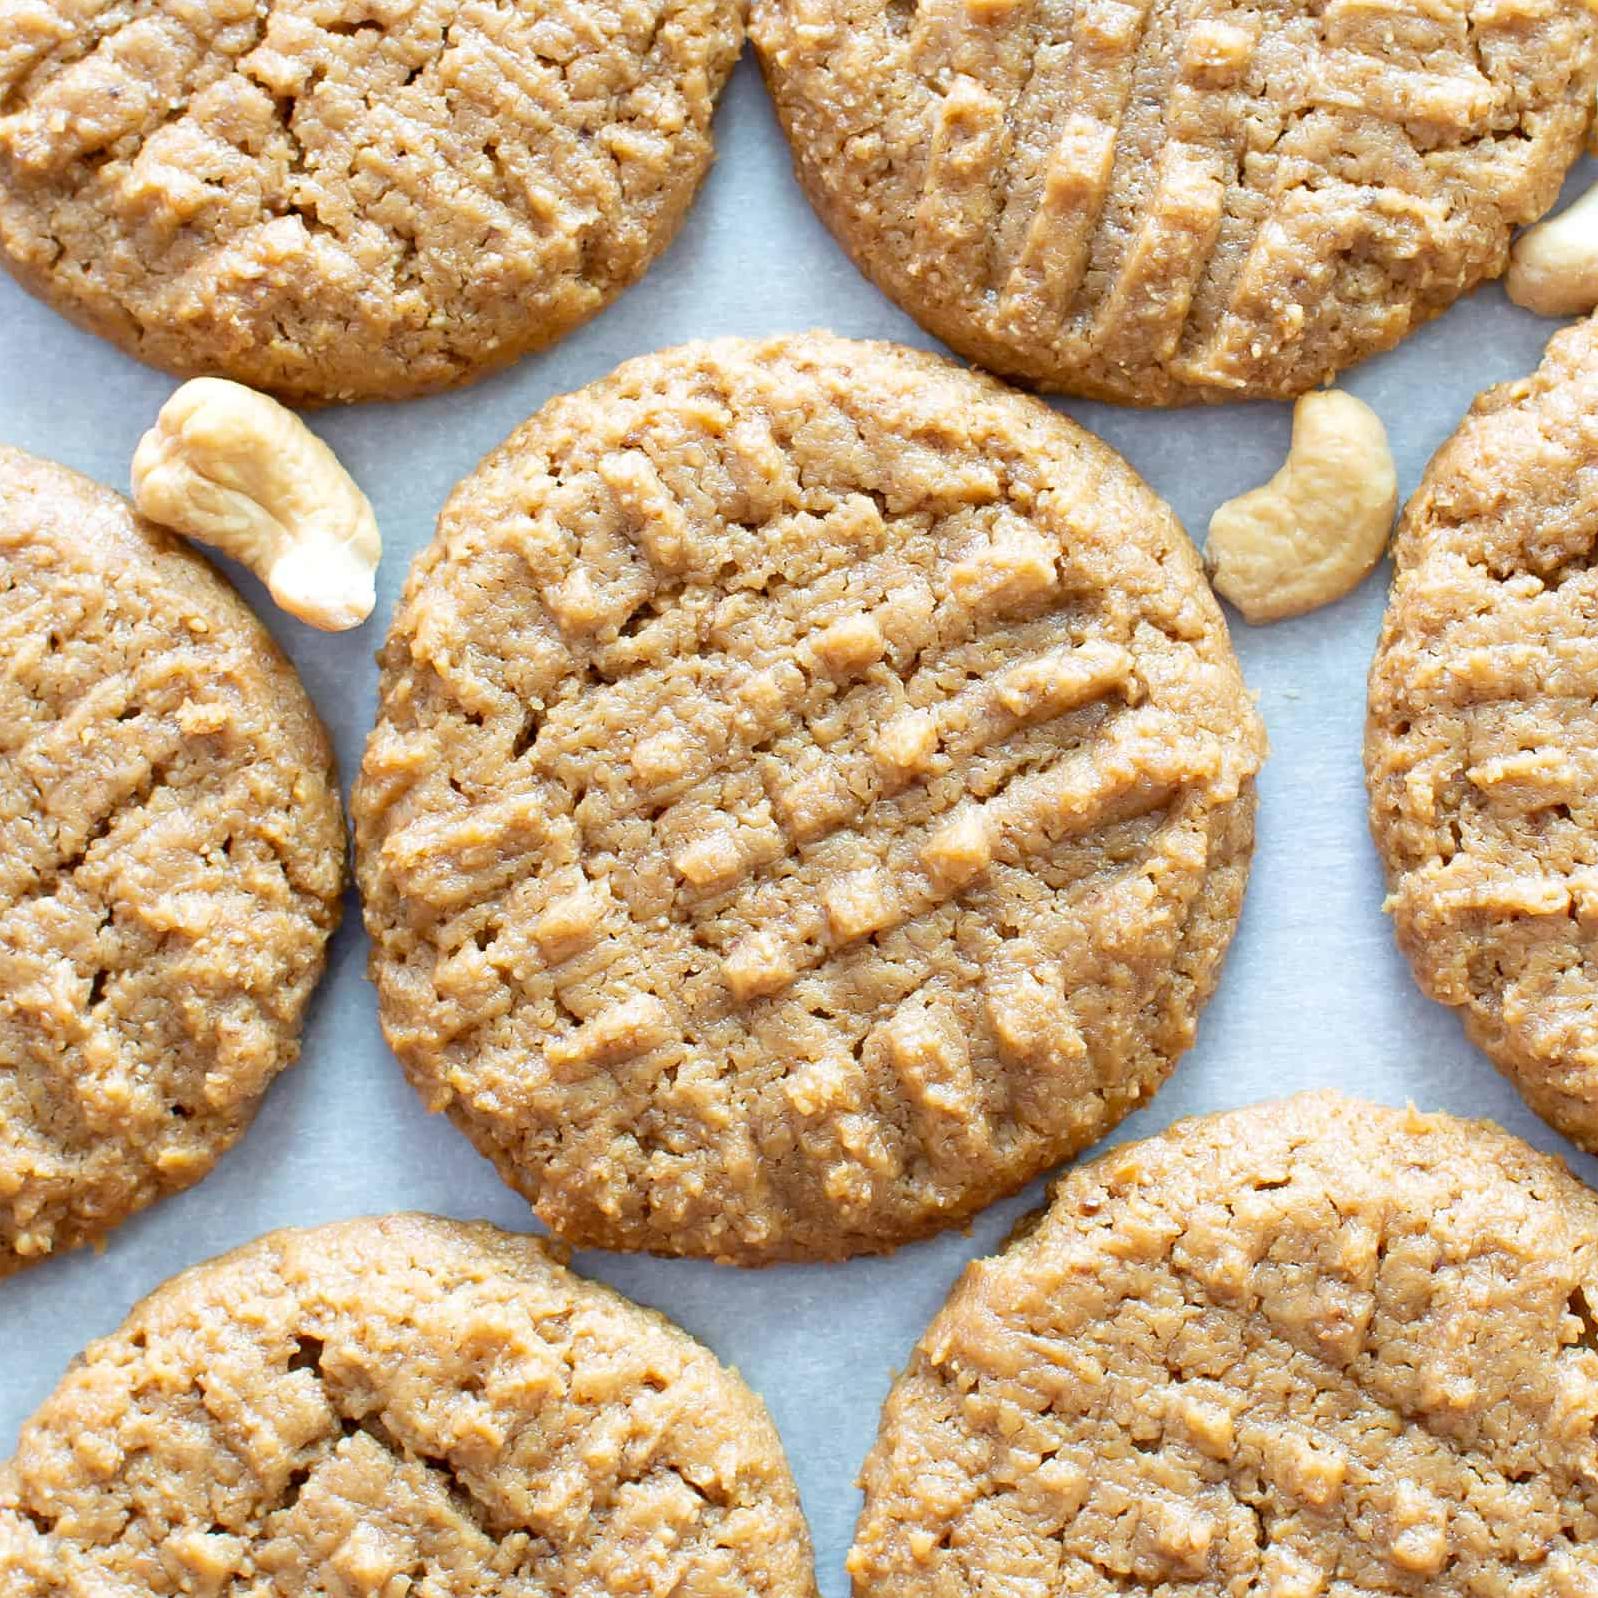  You won't believe these cookies are gluten-free!